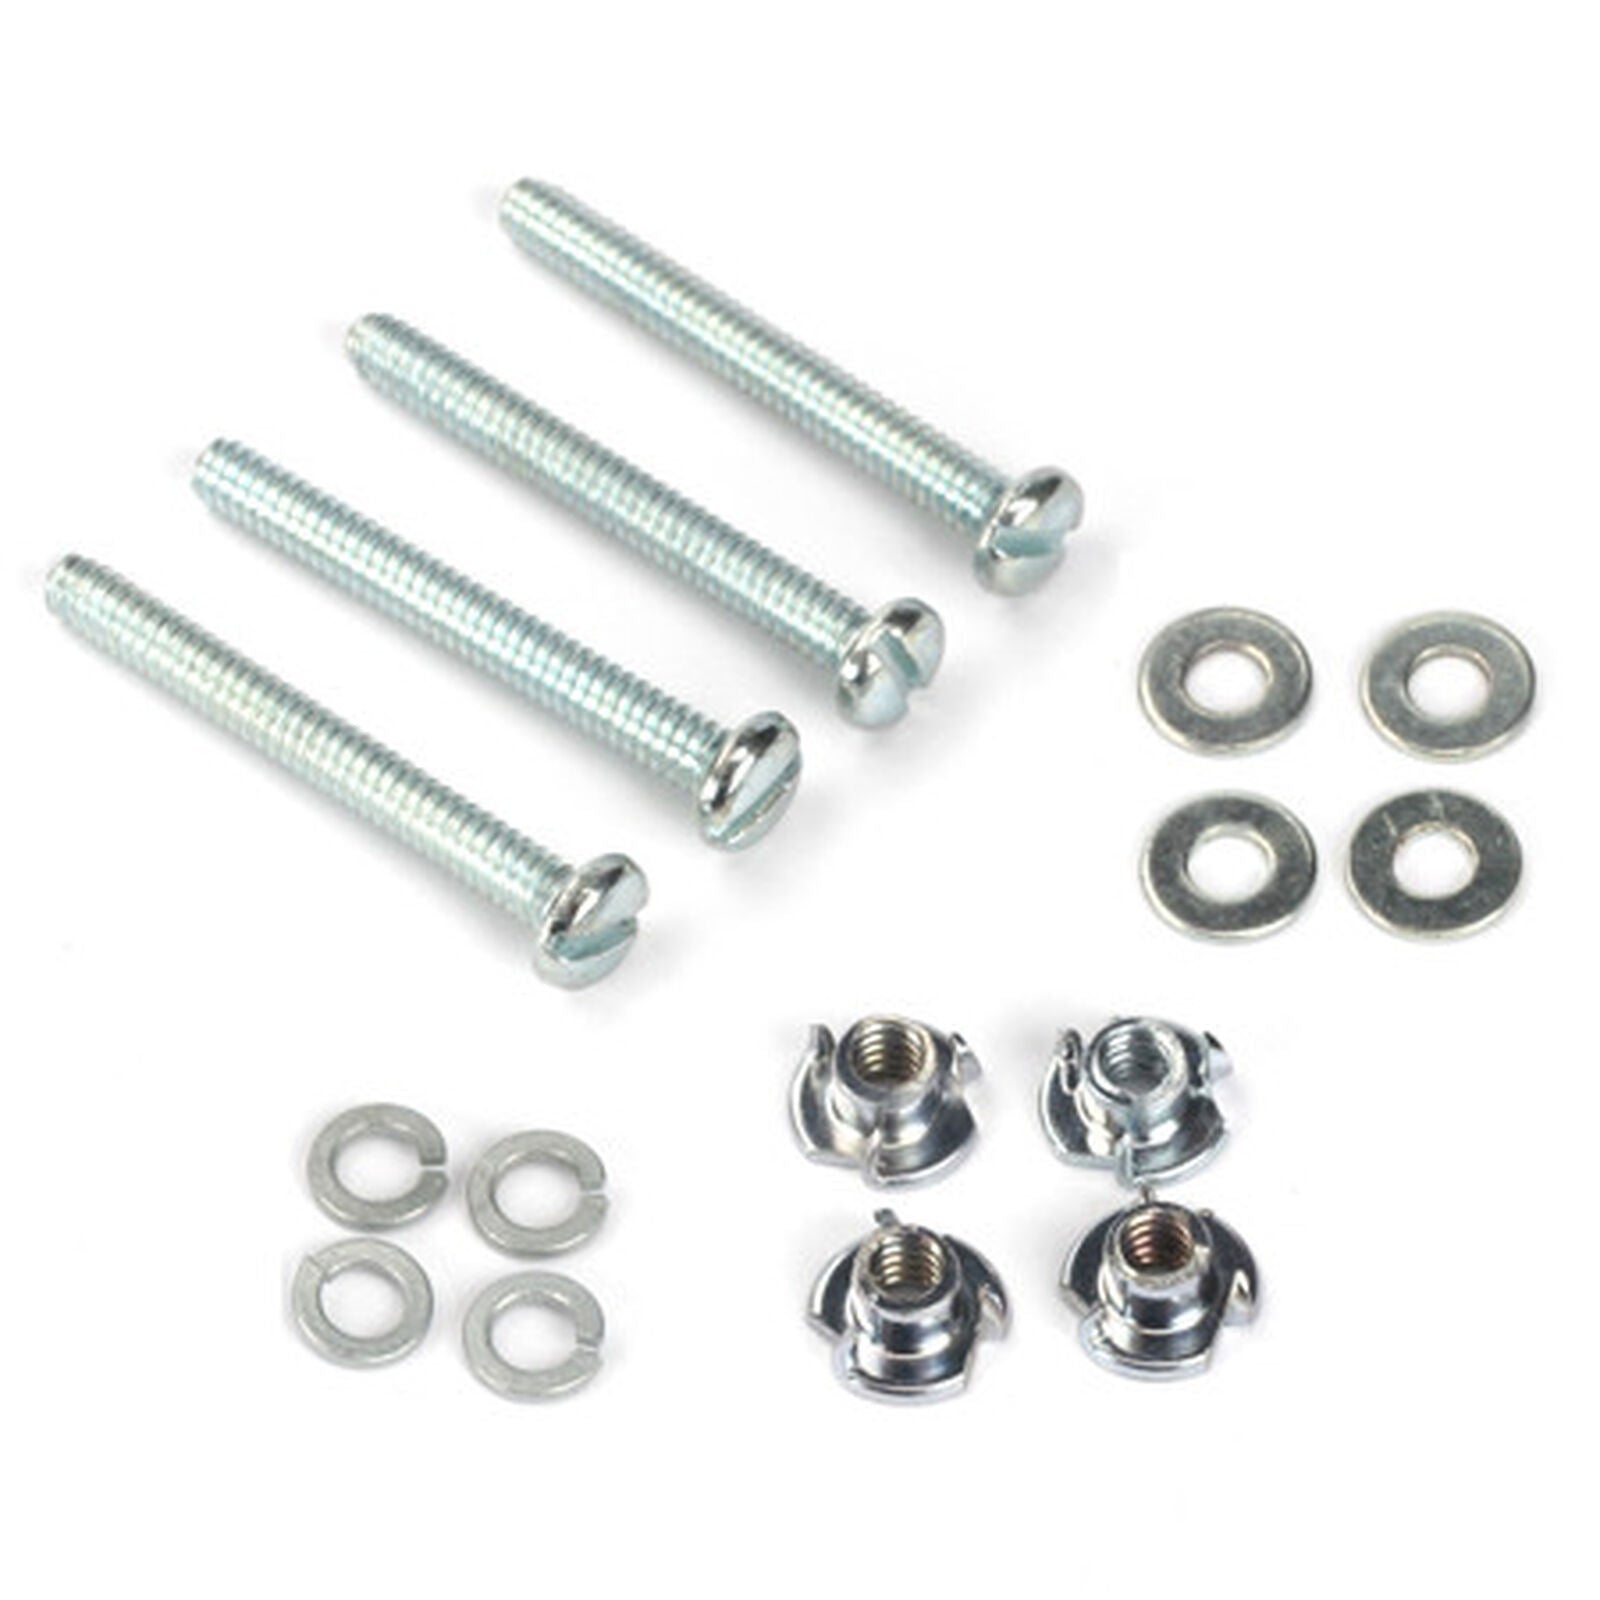 DUBRO 128 Mounting Bolts & Nuts, 6-32 x 1 1/4 (4)